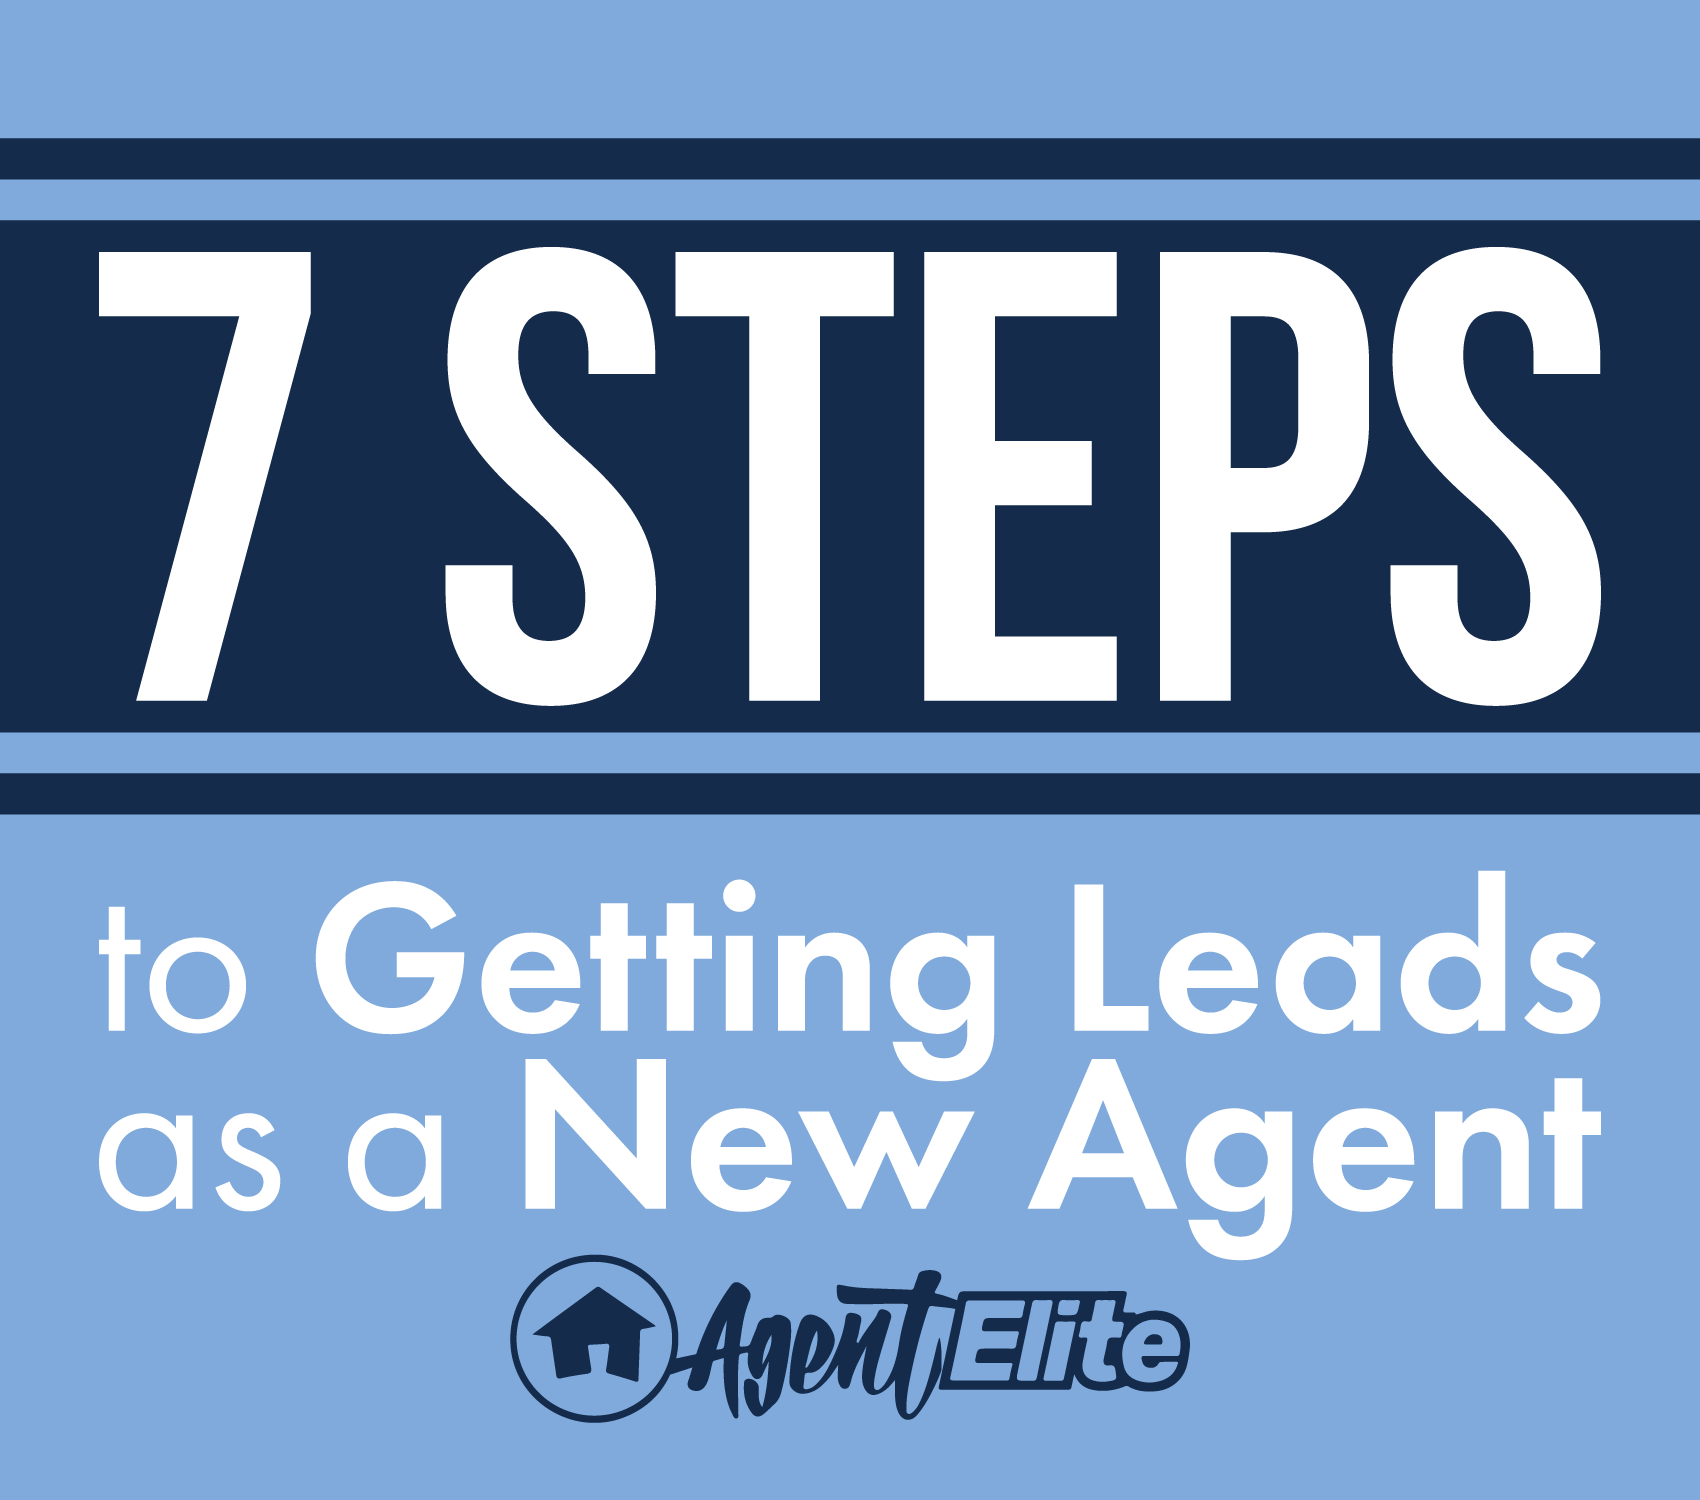 7 Steps to Getting Leads as a New Agent